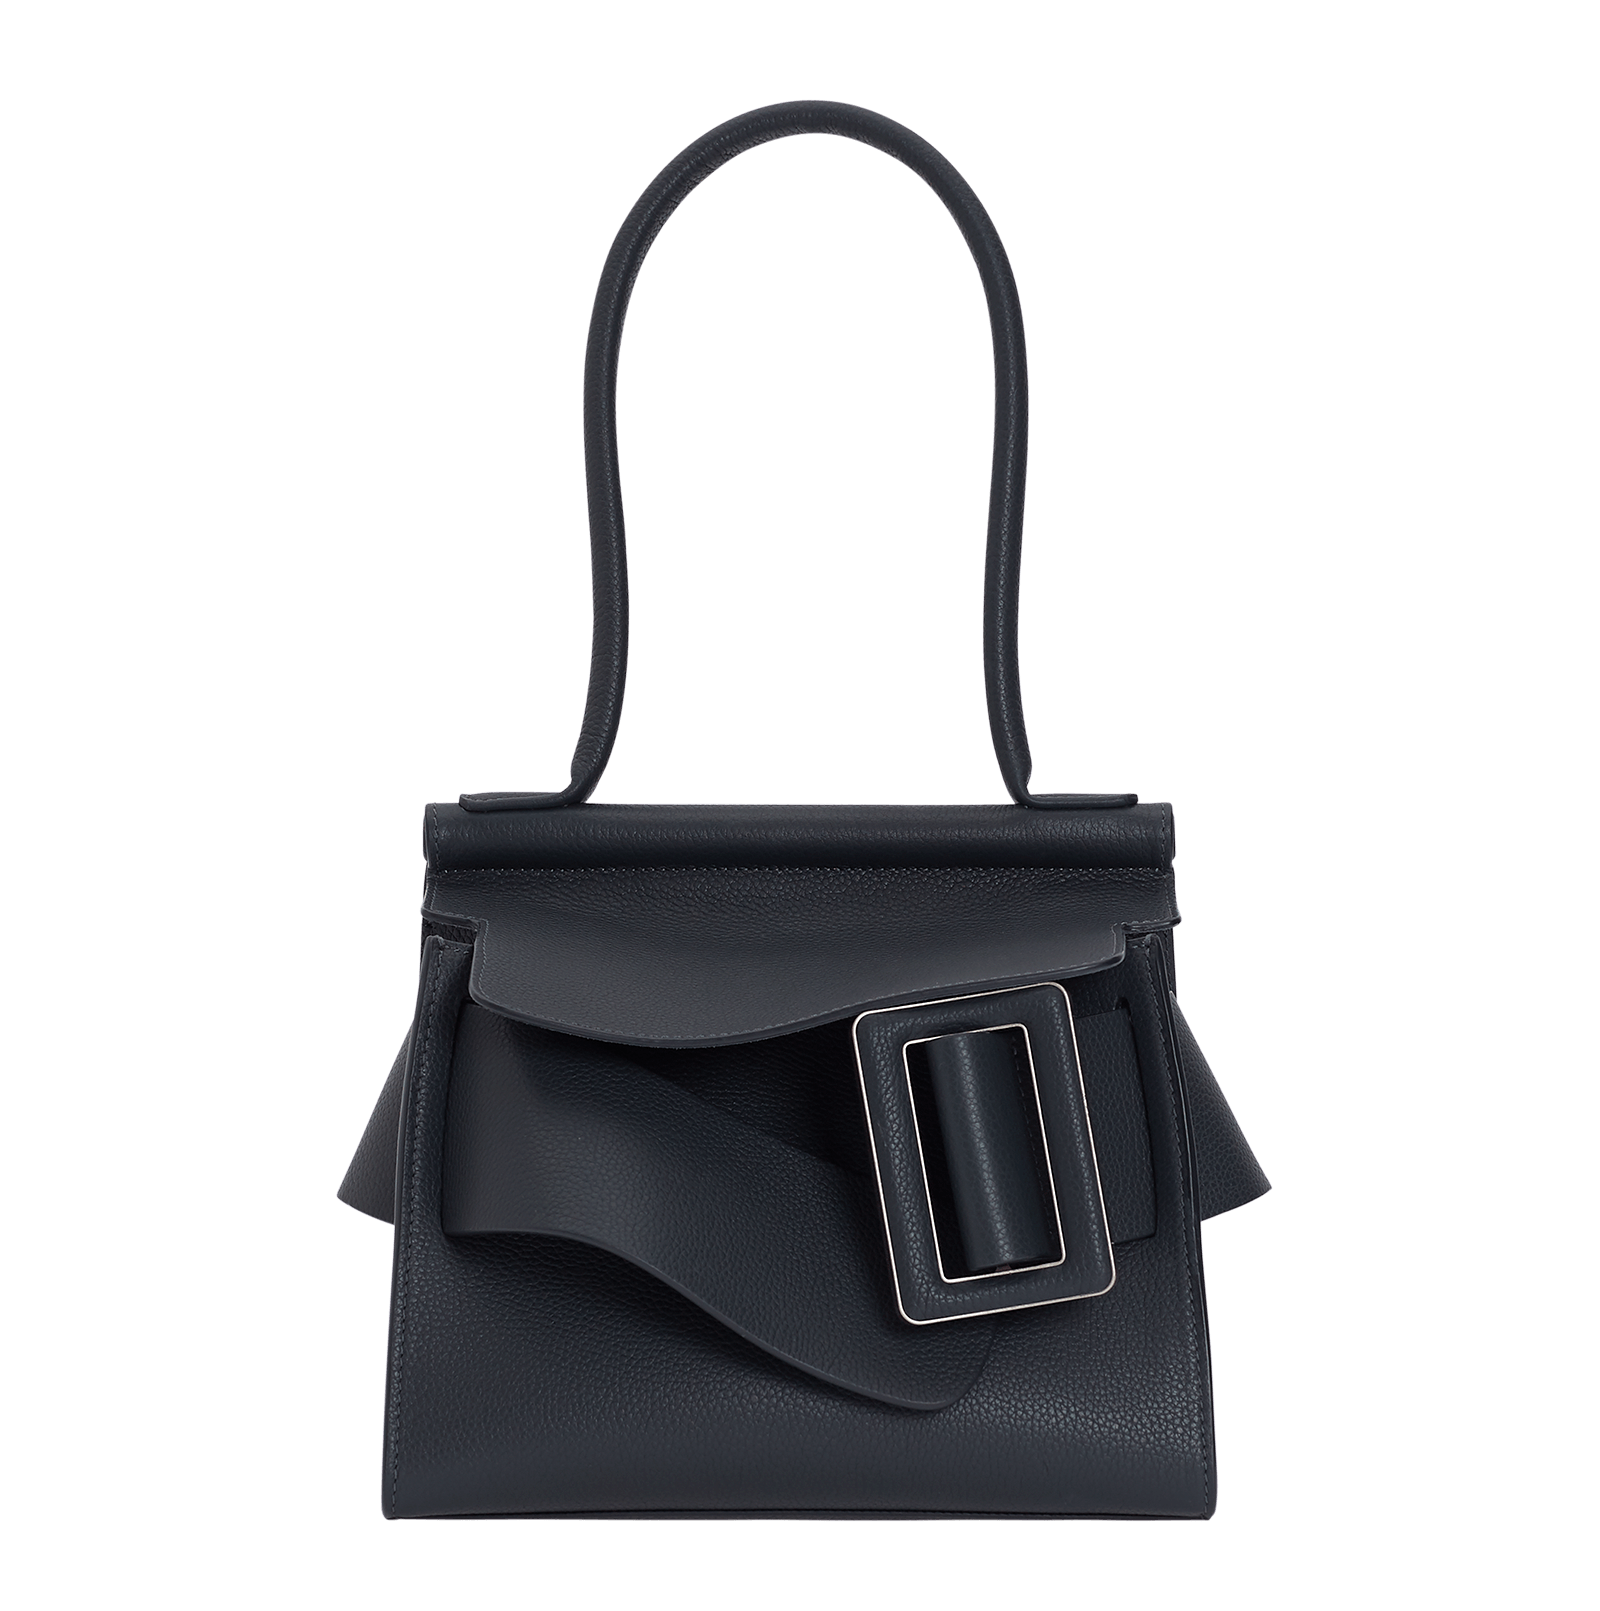 Blue, natural grain leather, structured handbag with a large, unfastened buckle, single carry handle and front flap closure. 